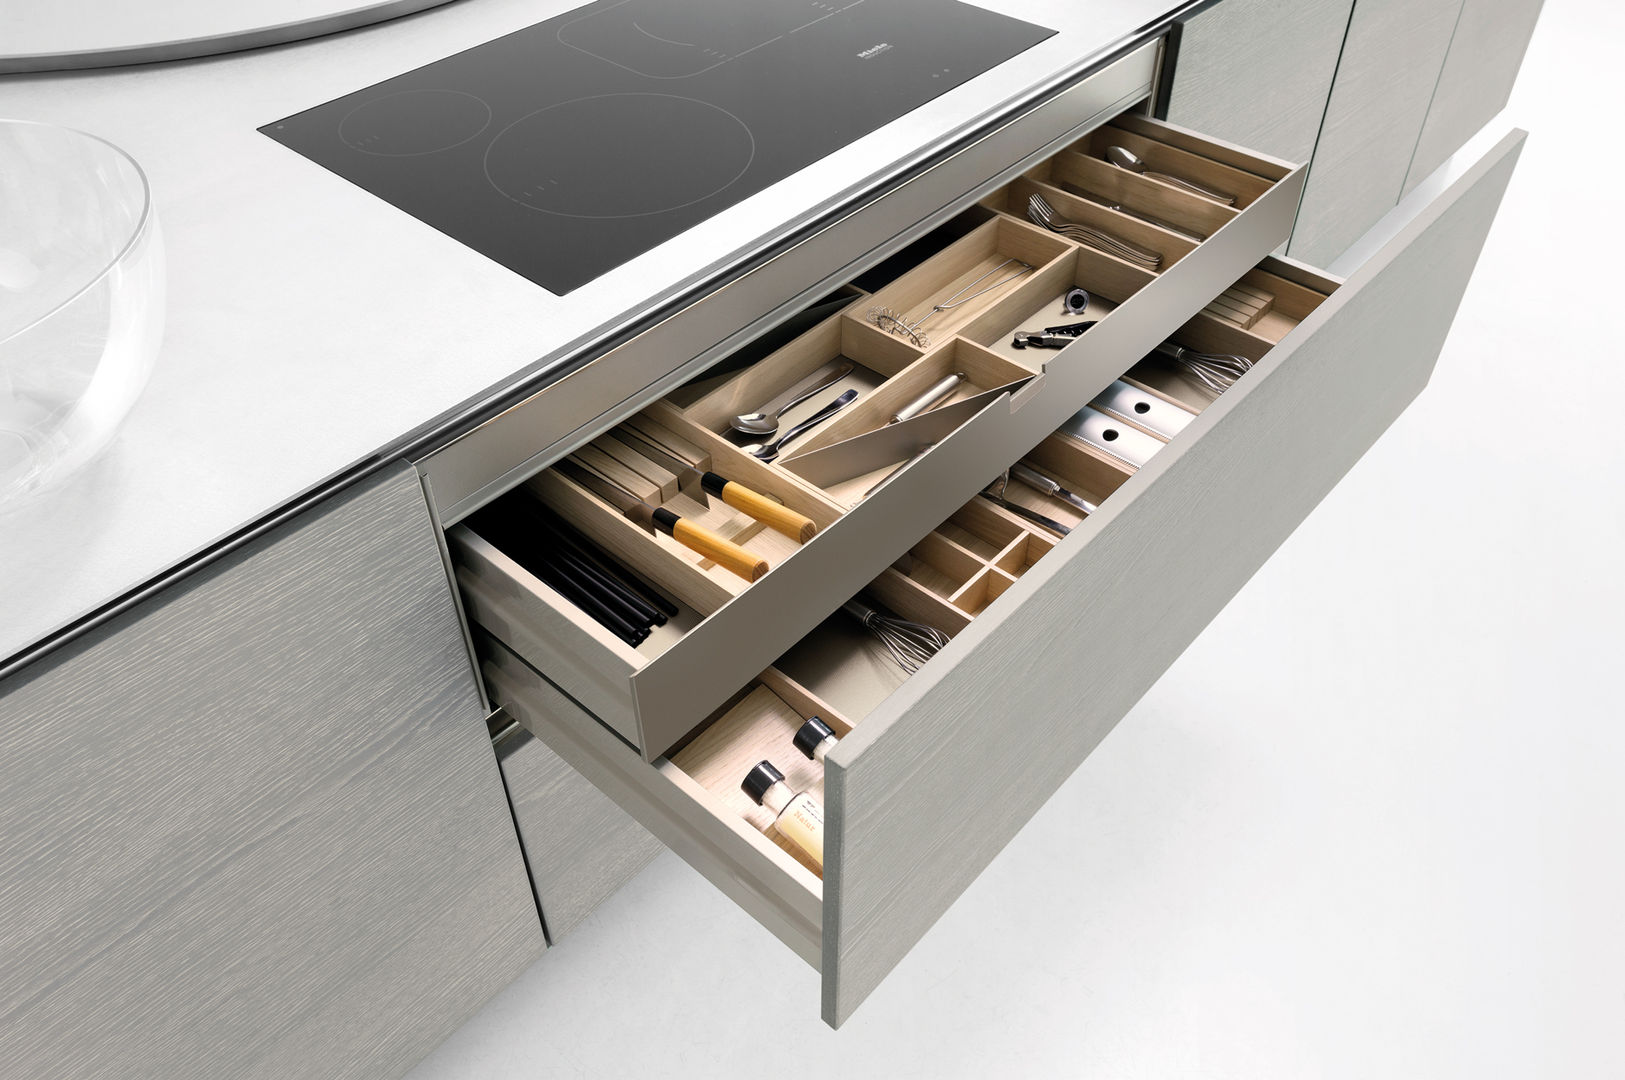 Storage options to make life easier fit Kitchens Dapur Modern Accessories & textiles